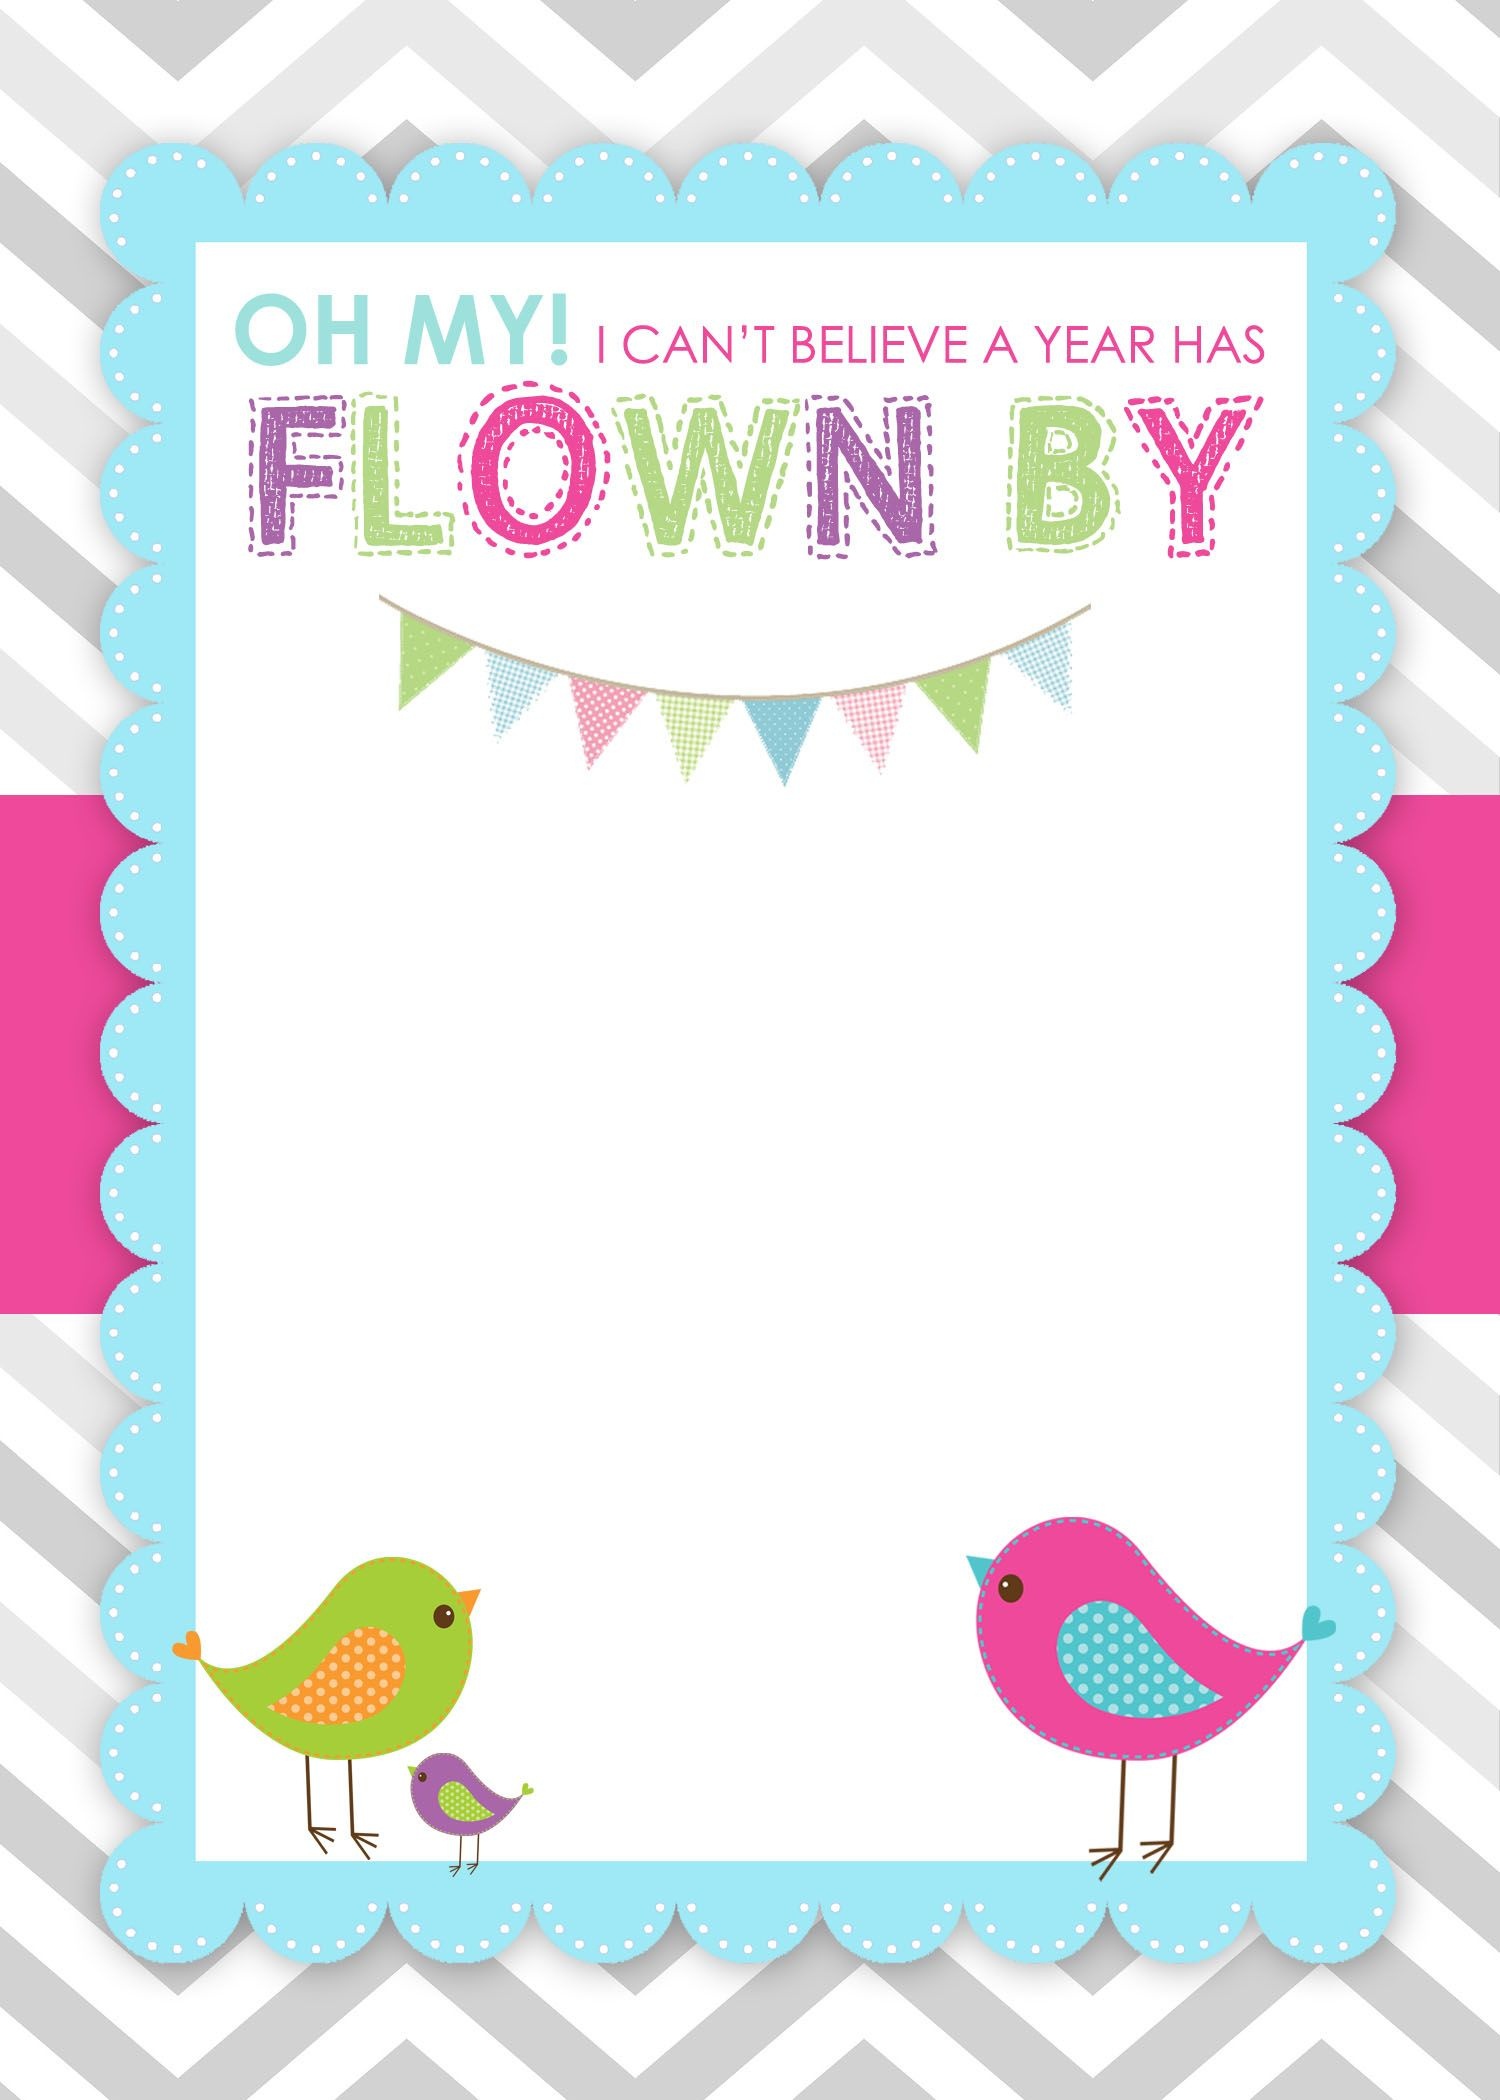 Bird Birthday Party With Free Printables | Creations | Free Birthday - Free Stork Party Invitations Printable